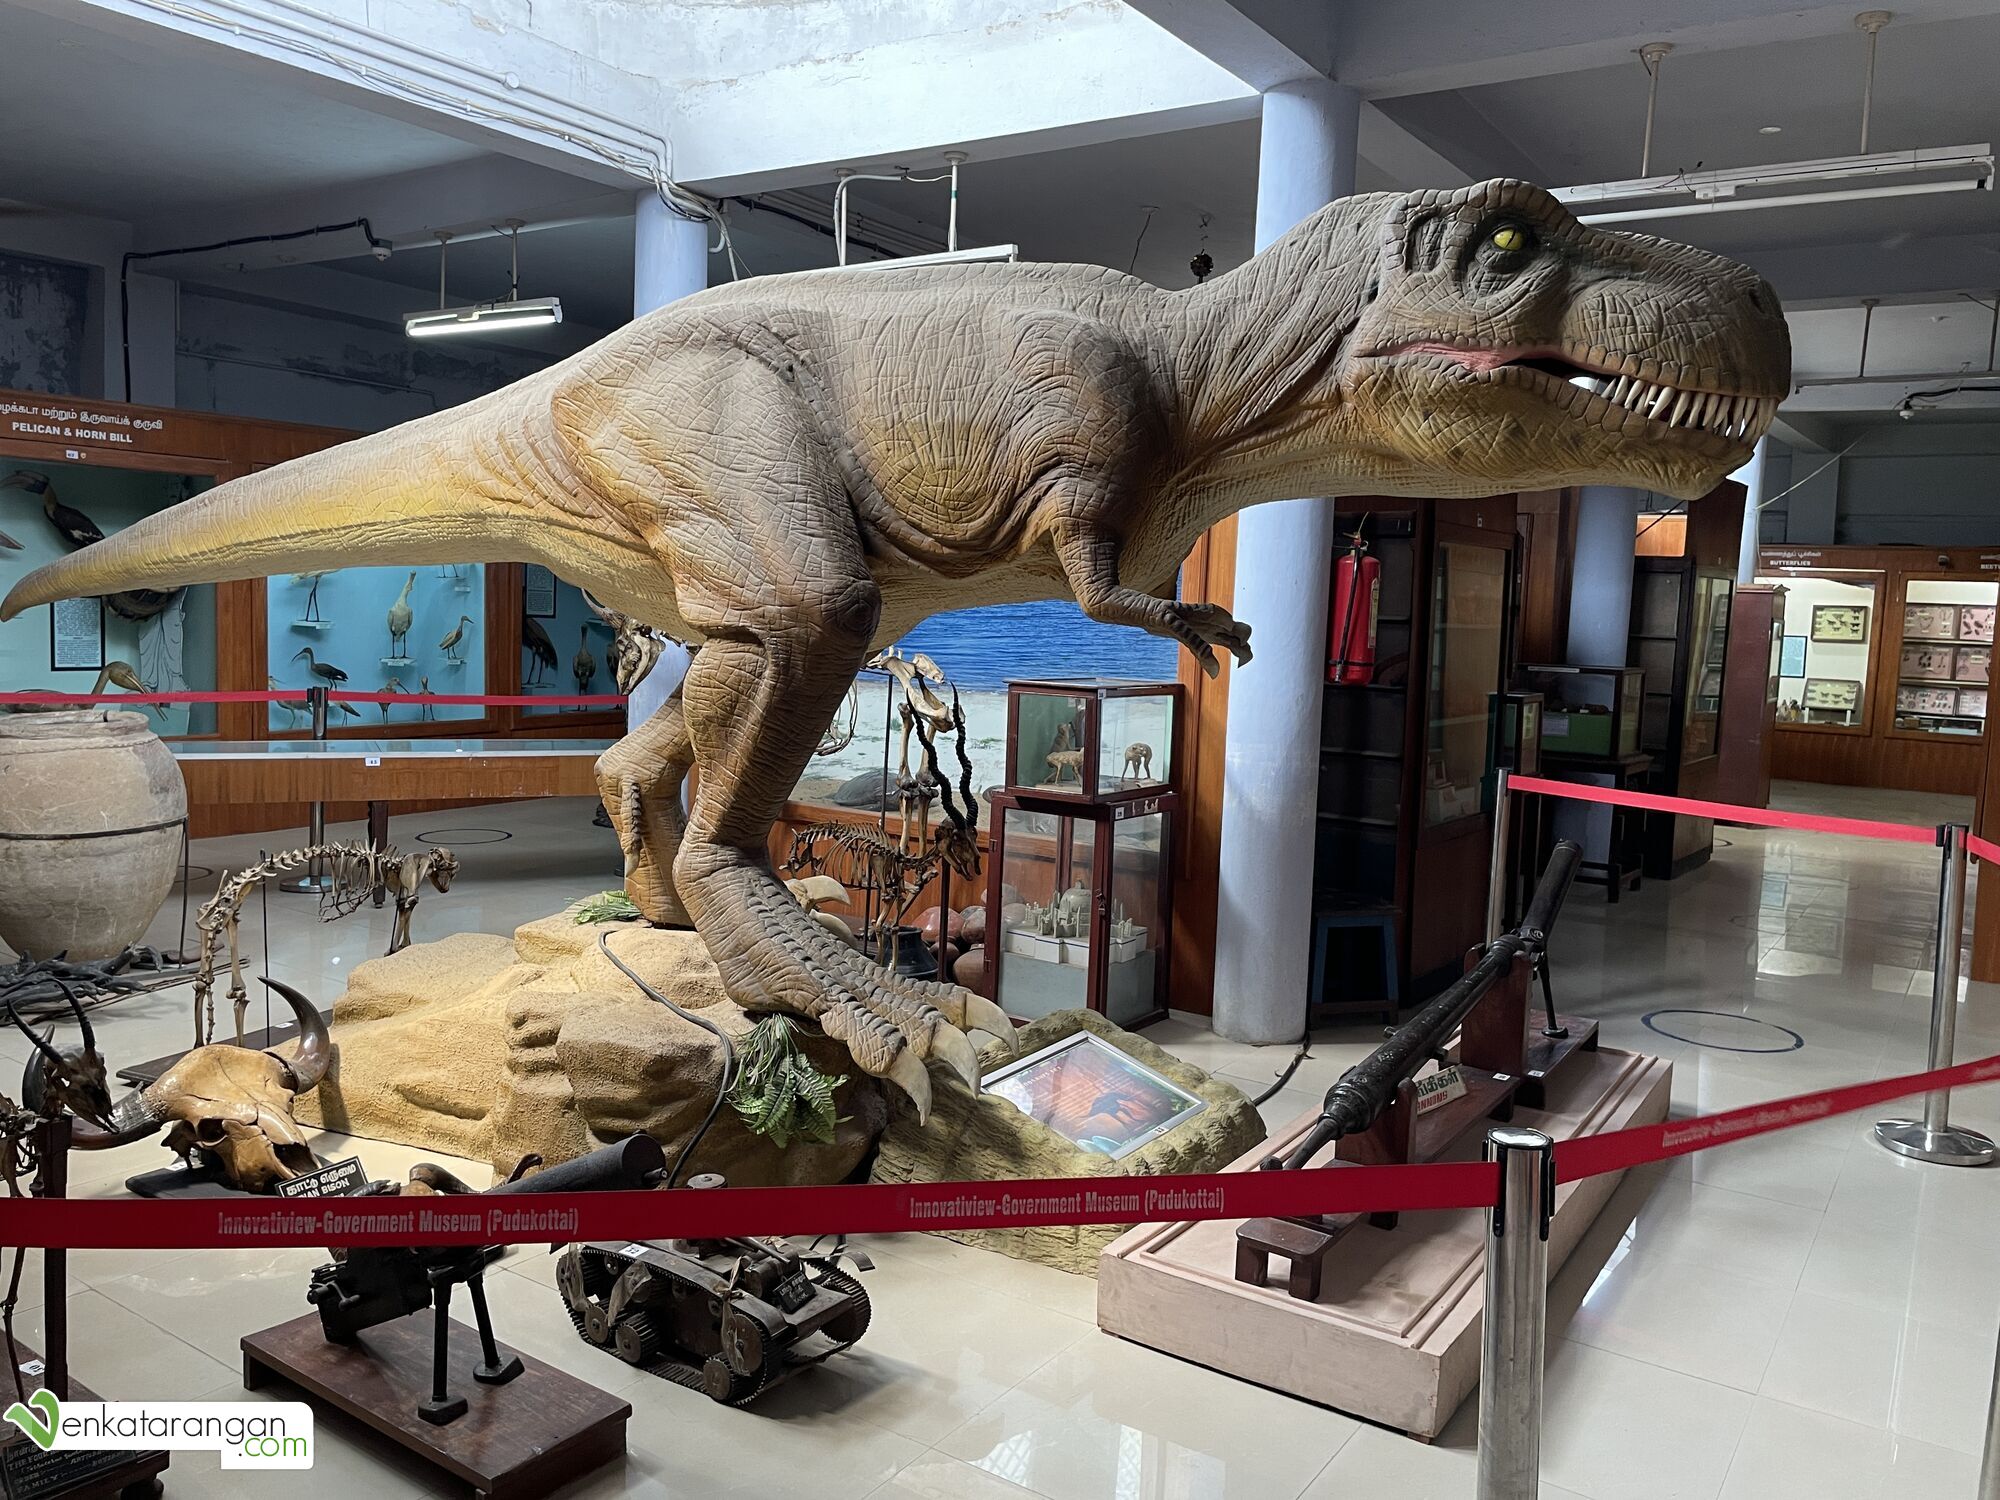 A dinosaur and a cannon on display